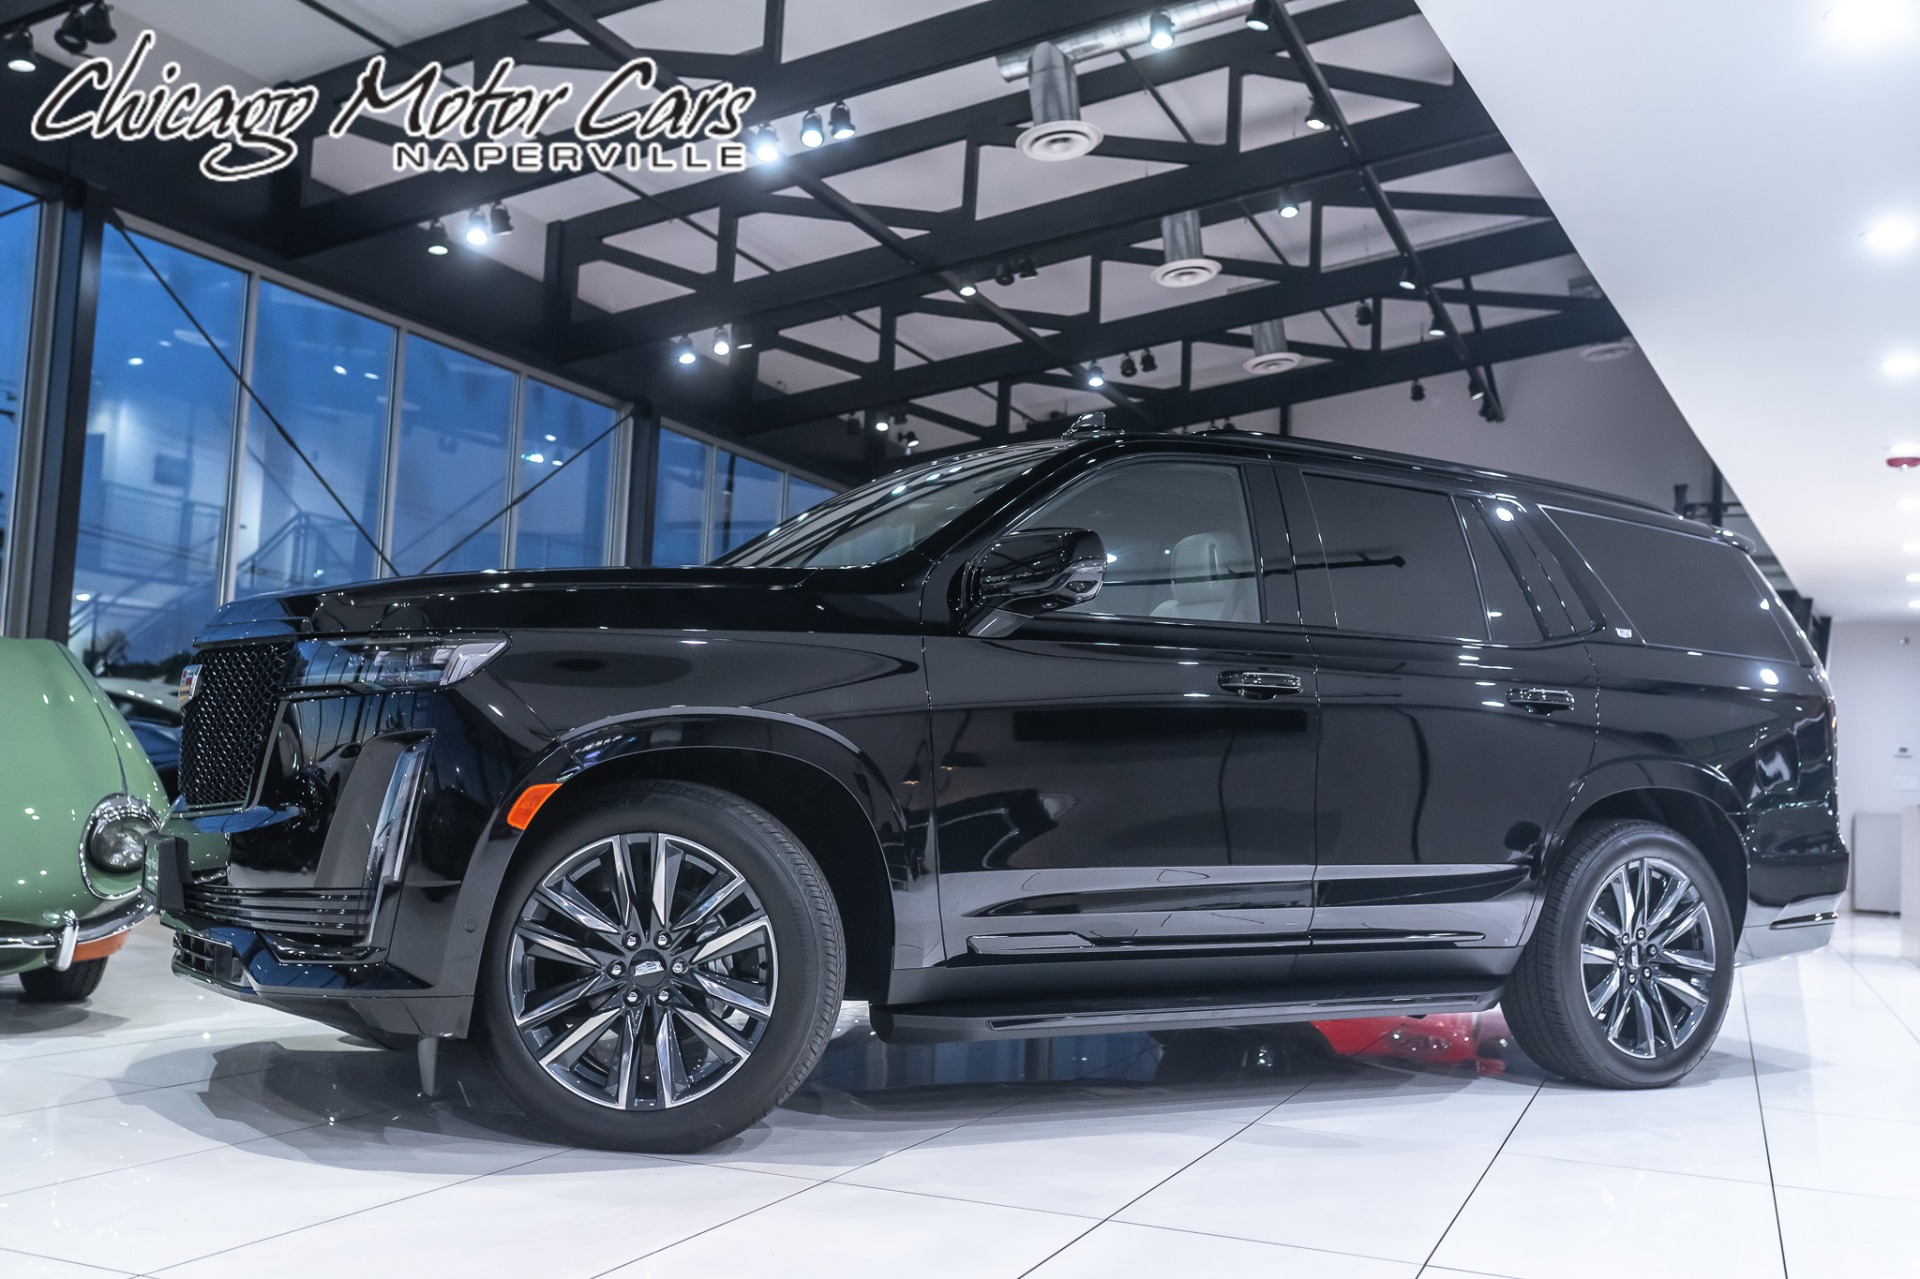 Used-2022-Cadillac-Escalade-Sport-4WD-Duramax-30L-Diesel-Only-10-Miles-Night-Vision-AKG-Sound-Pkg